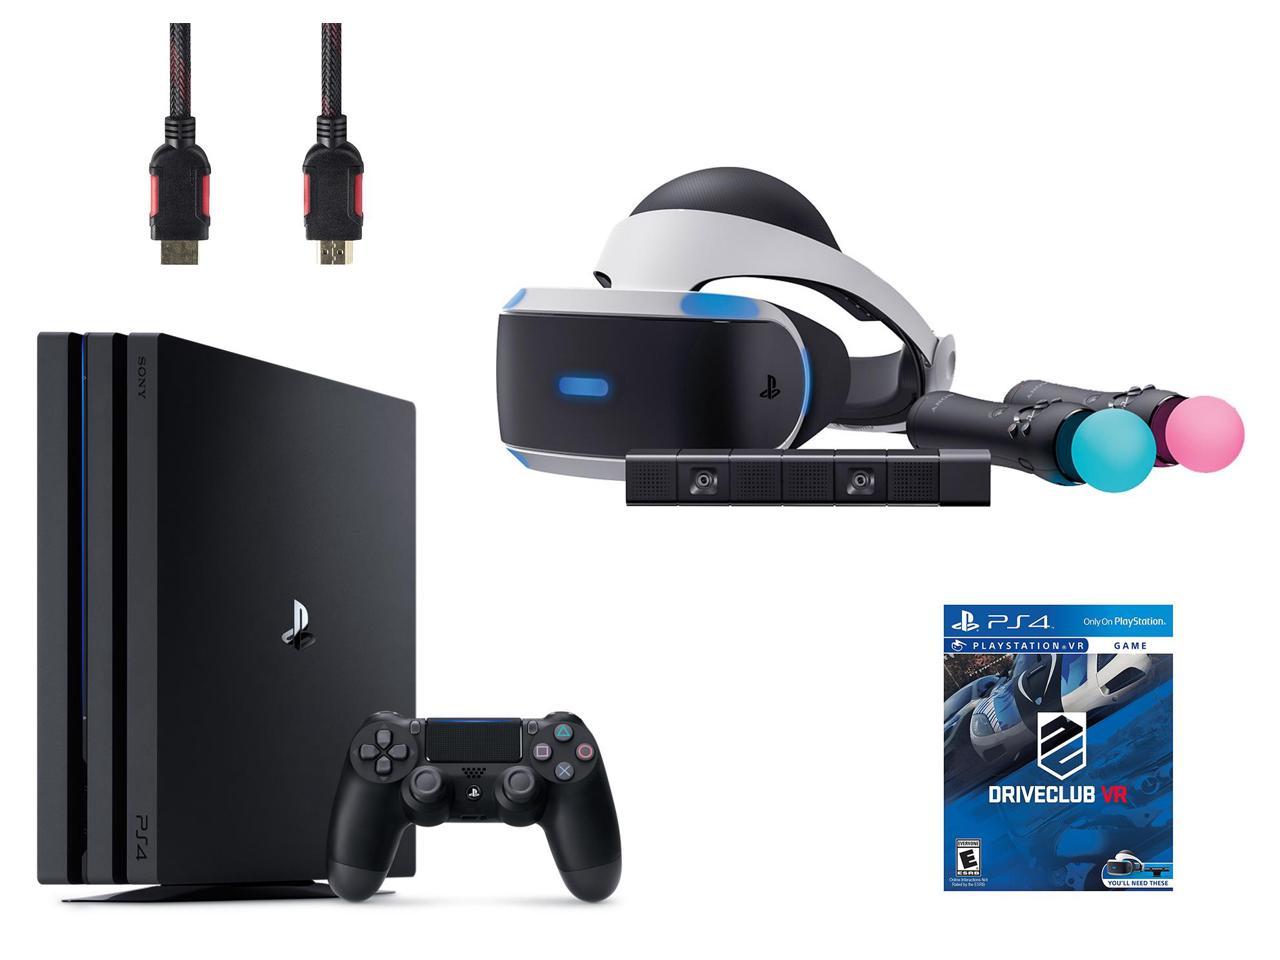 psvr starter pack with move controllers